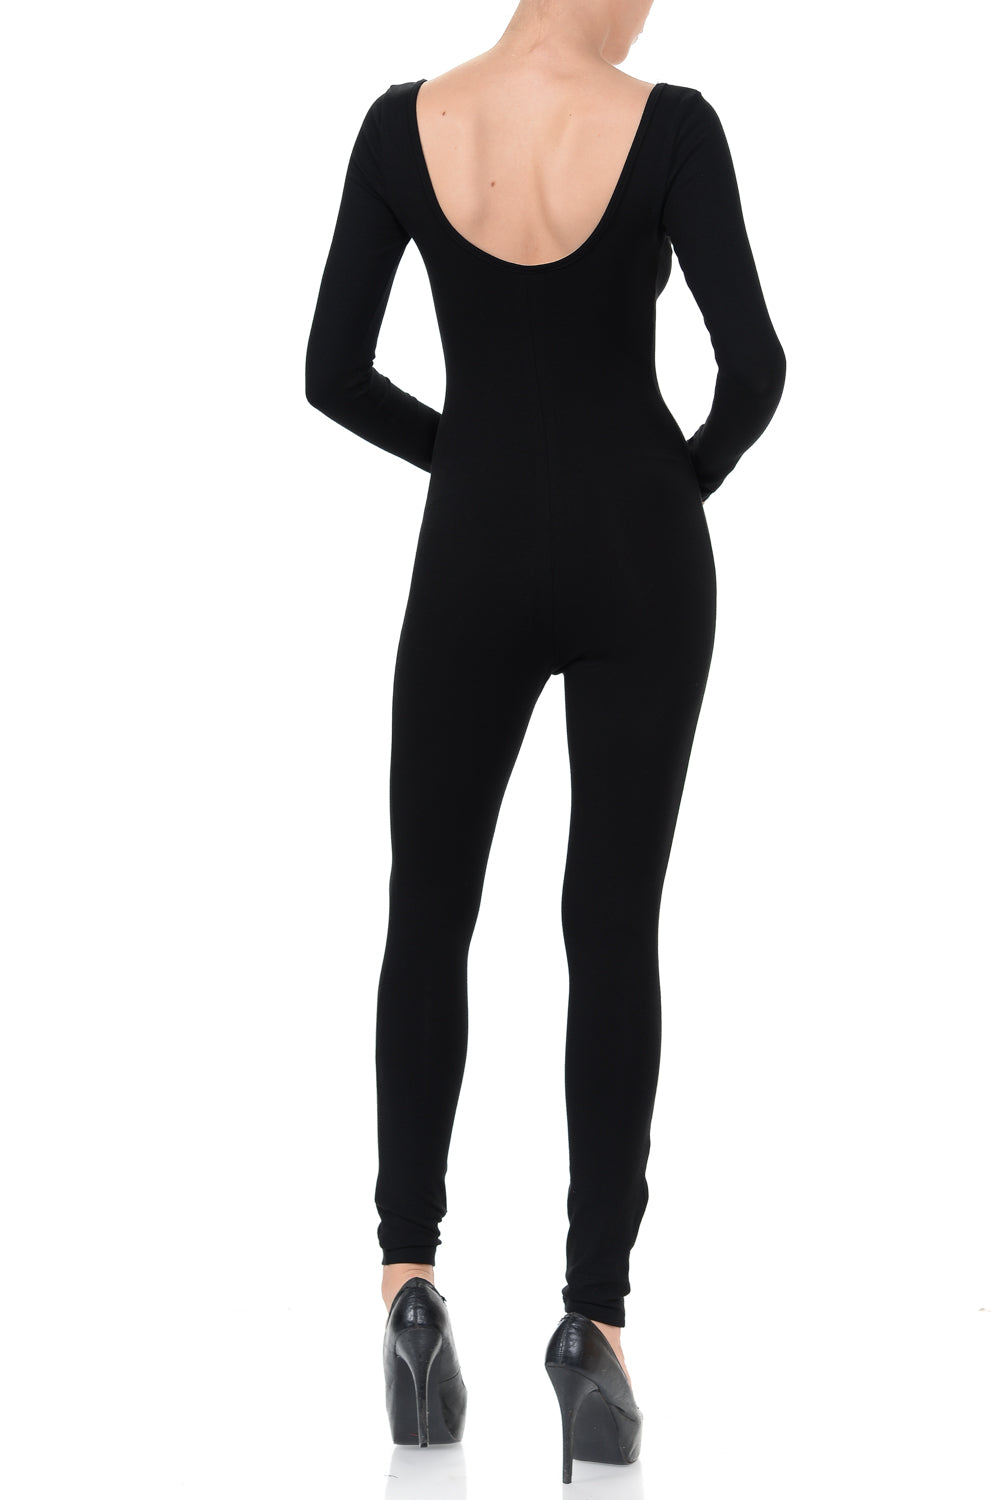 7Wins JJJ Fashion Women's Cotton Long Sleeve Catsuit Yoga Jumpsuit / Made in USA